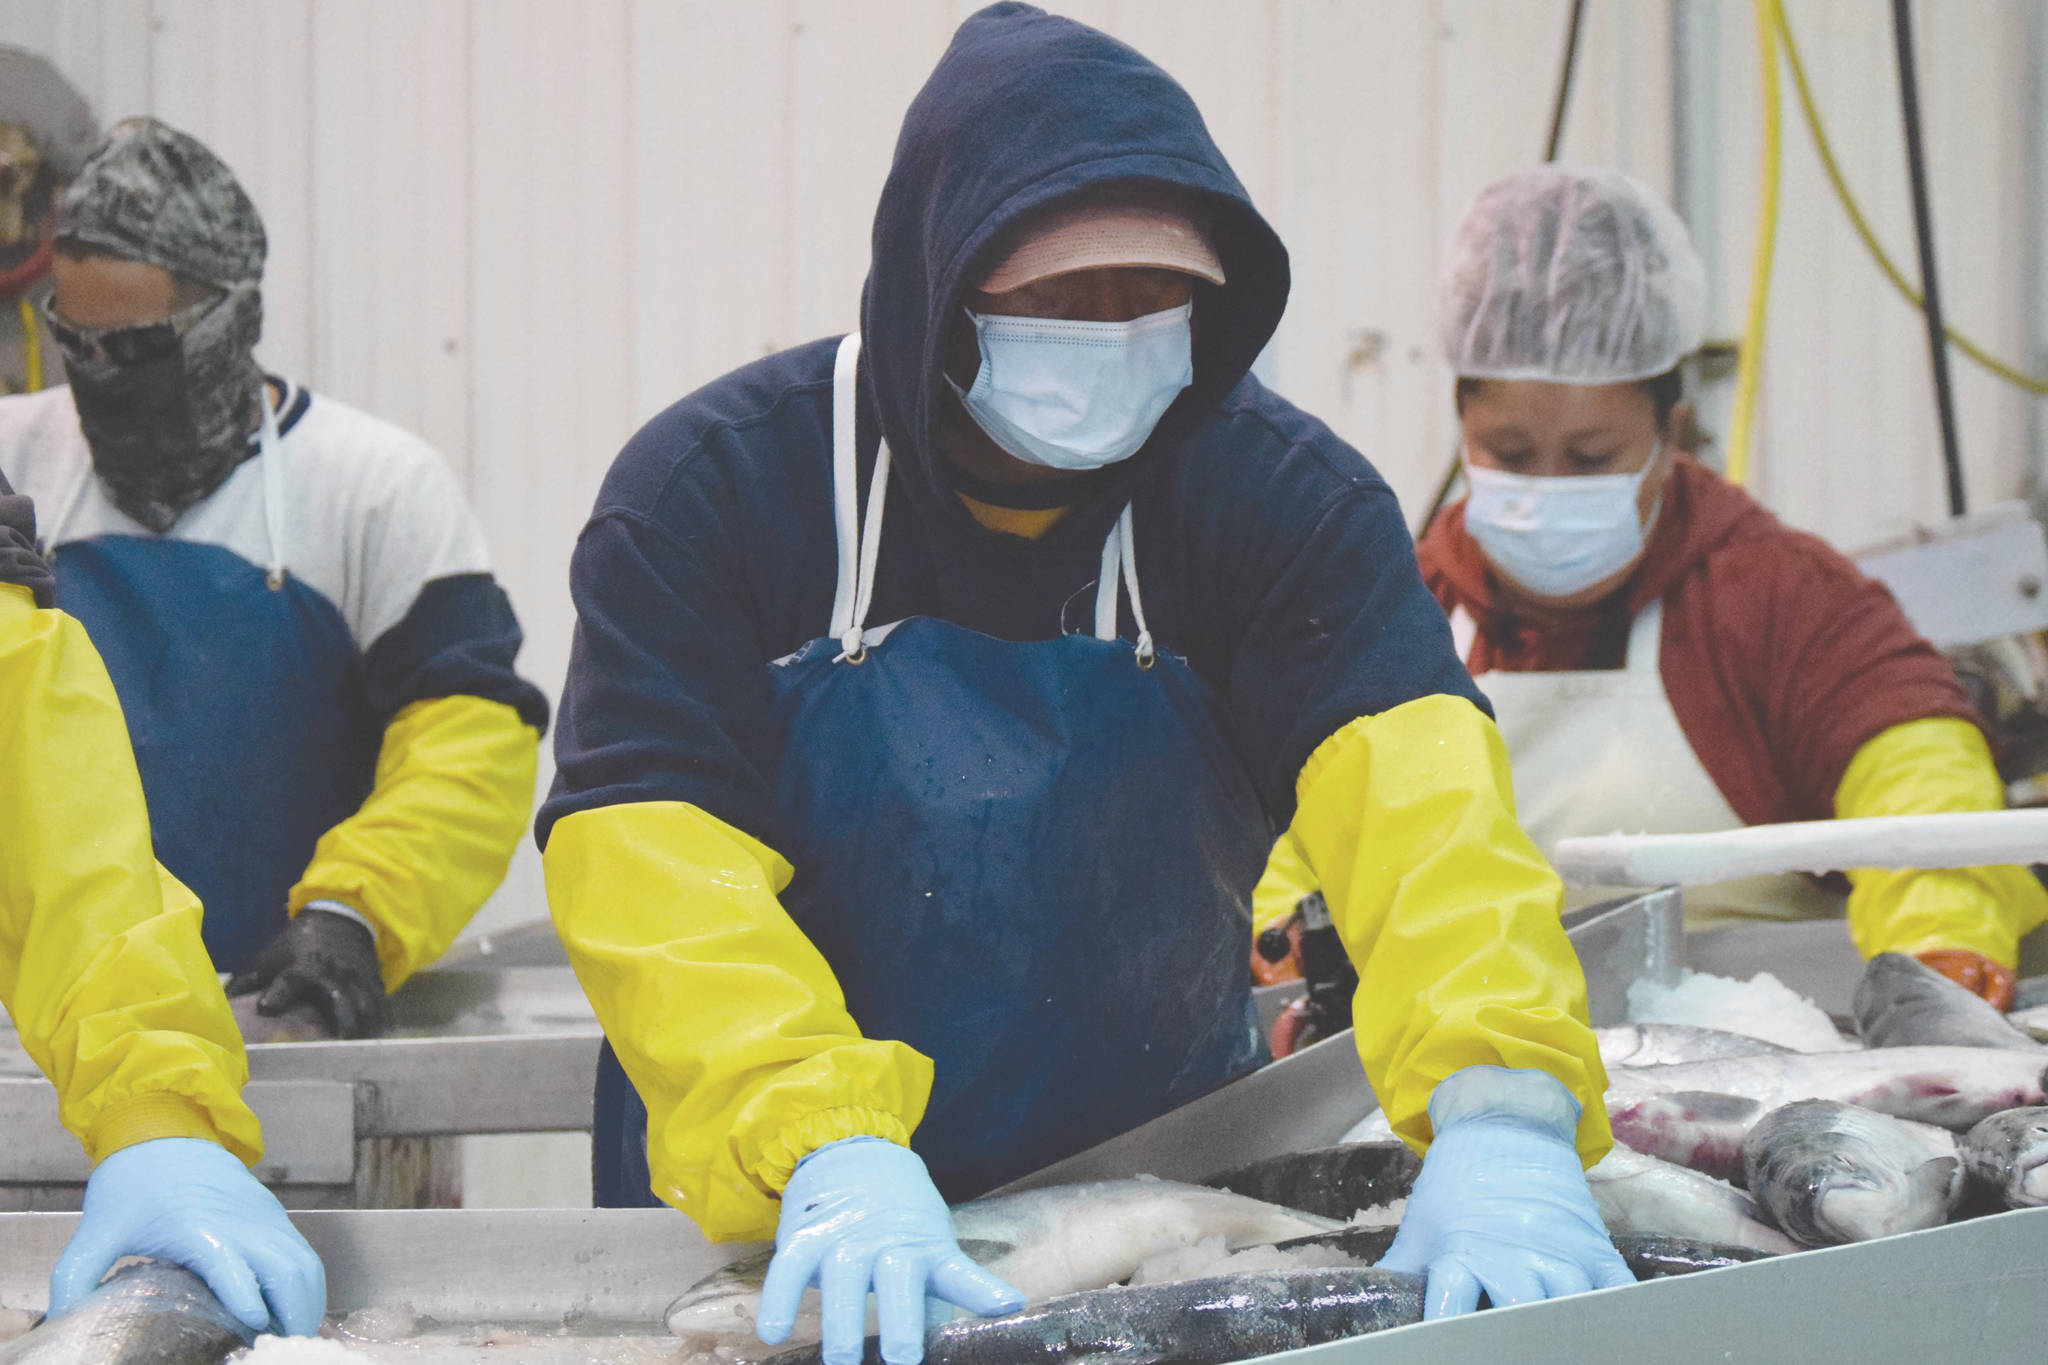 Joseph Lee, of Idaho, backed by Ivan Zarate, of Arizona, and Abiud Zarate, of Baja California, Mexico, arrange fish so their heads can be chopped off by a guillotine-style machine Tuesday, July 14, 2020, at Pacific Star Seafoods in Kenai, Alaska. (Photo by Jeff Helminiak/Peninsula Clarion)